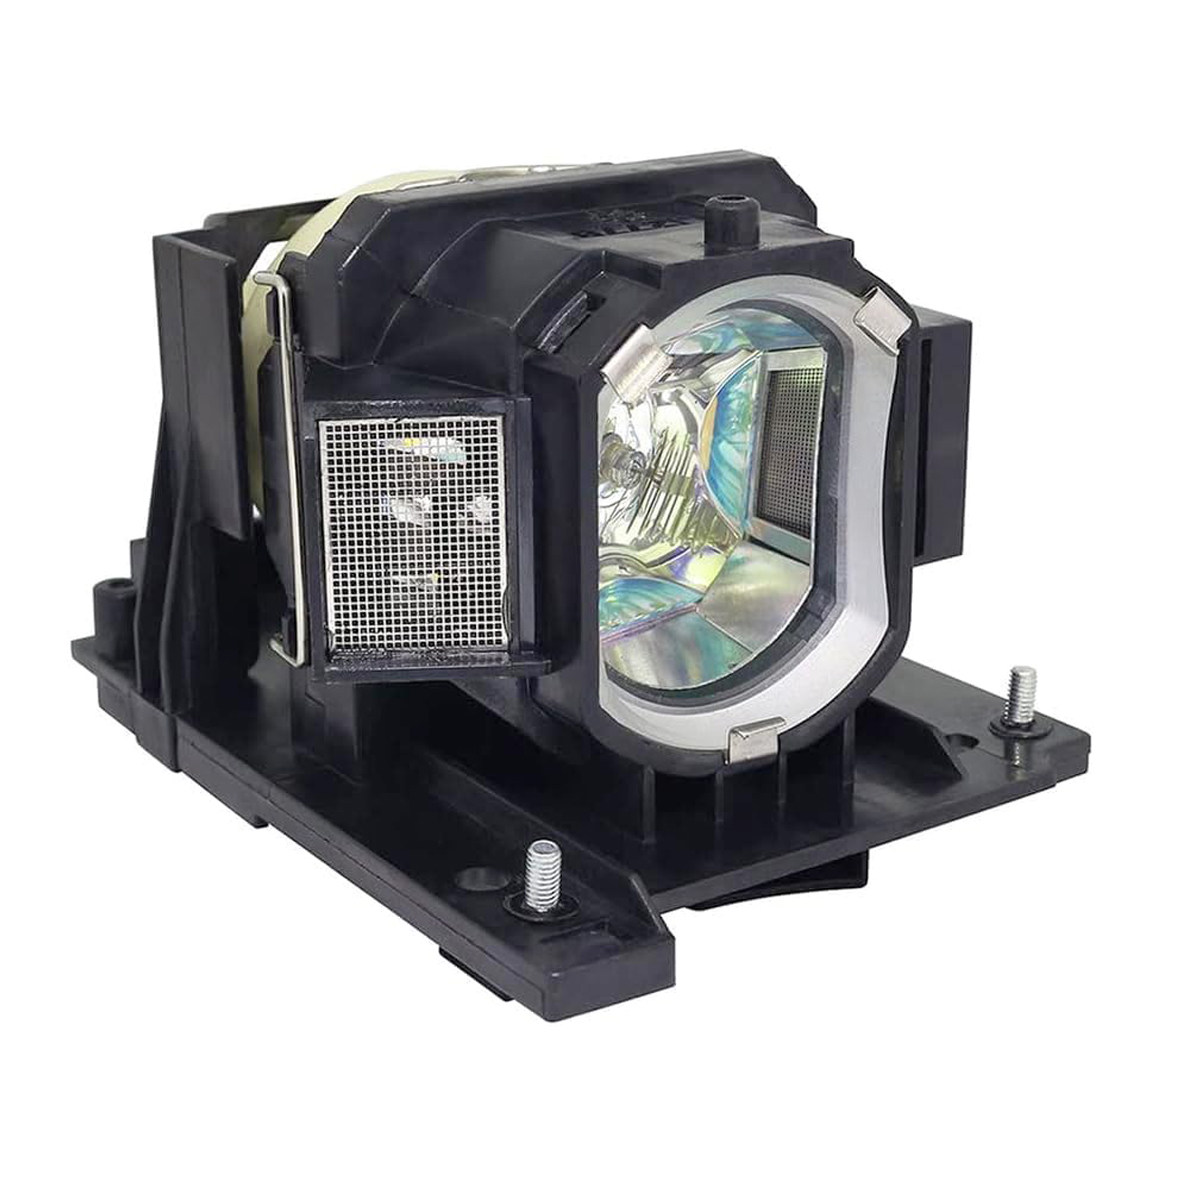 Replacement Projector lamp RLC-063 For VIEWSONIC Pro9500